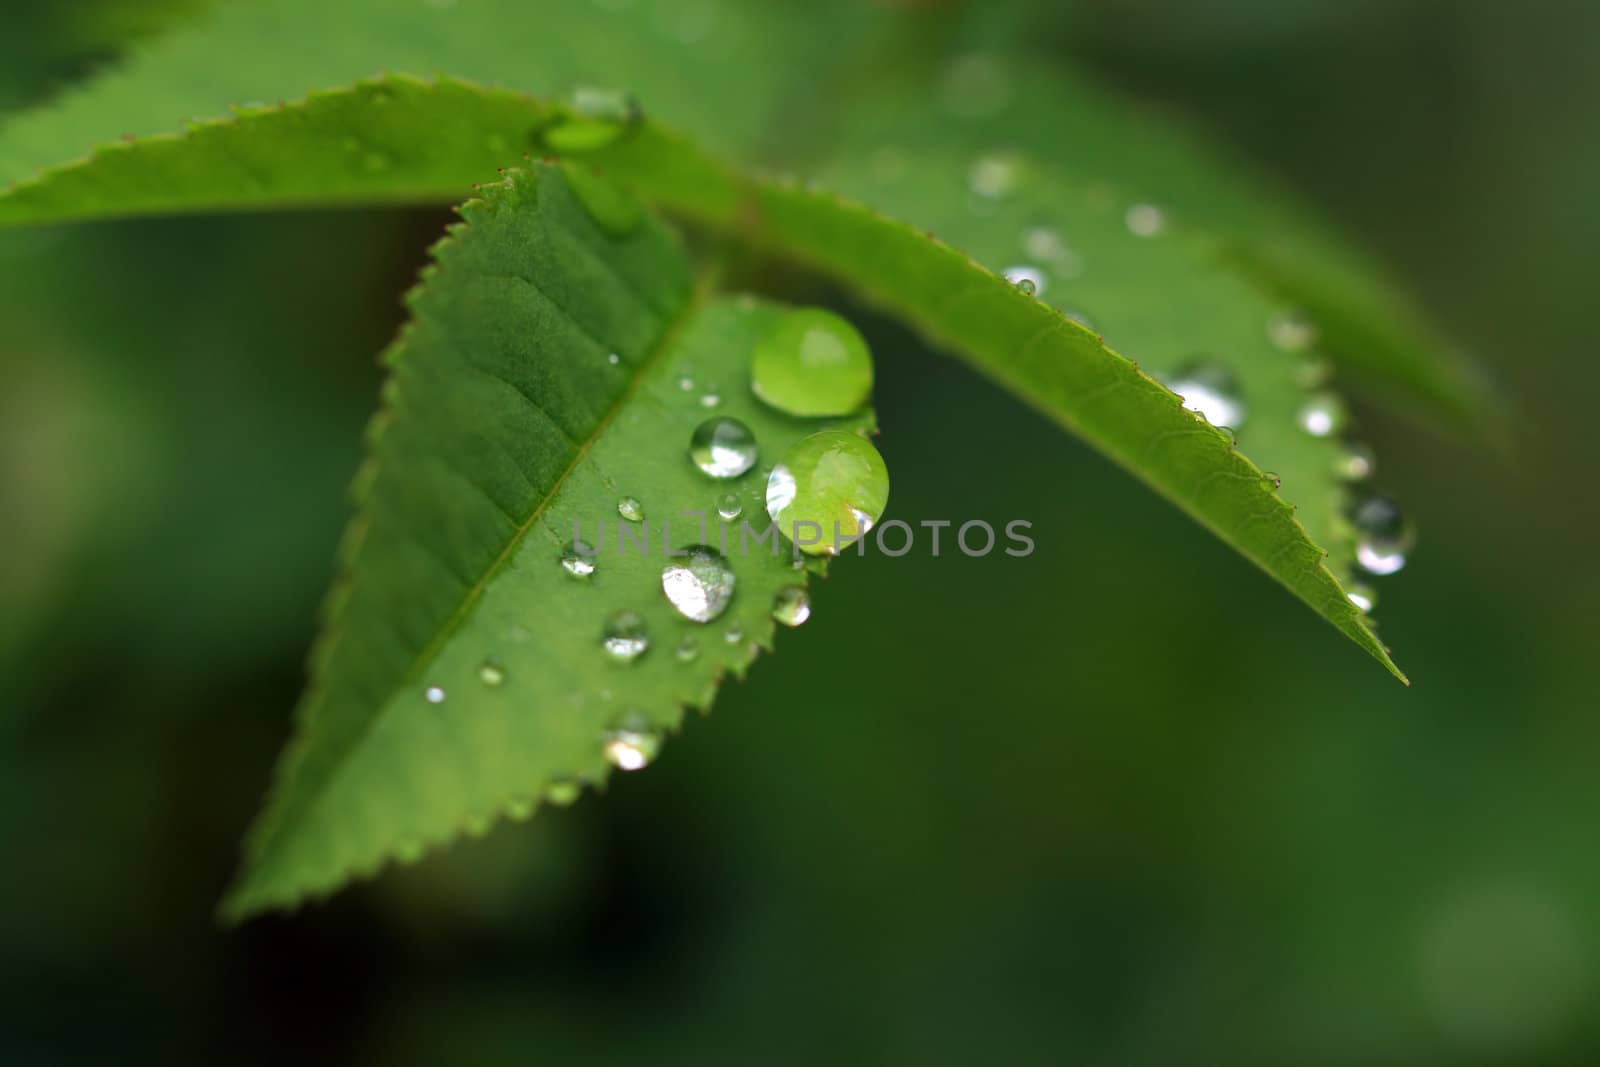 rain dripped on green herb by basel101658